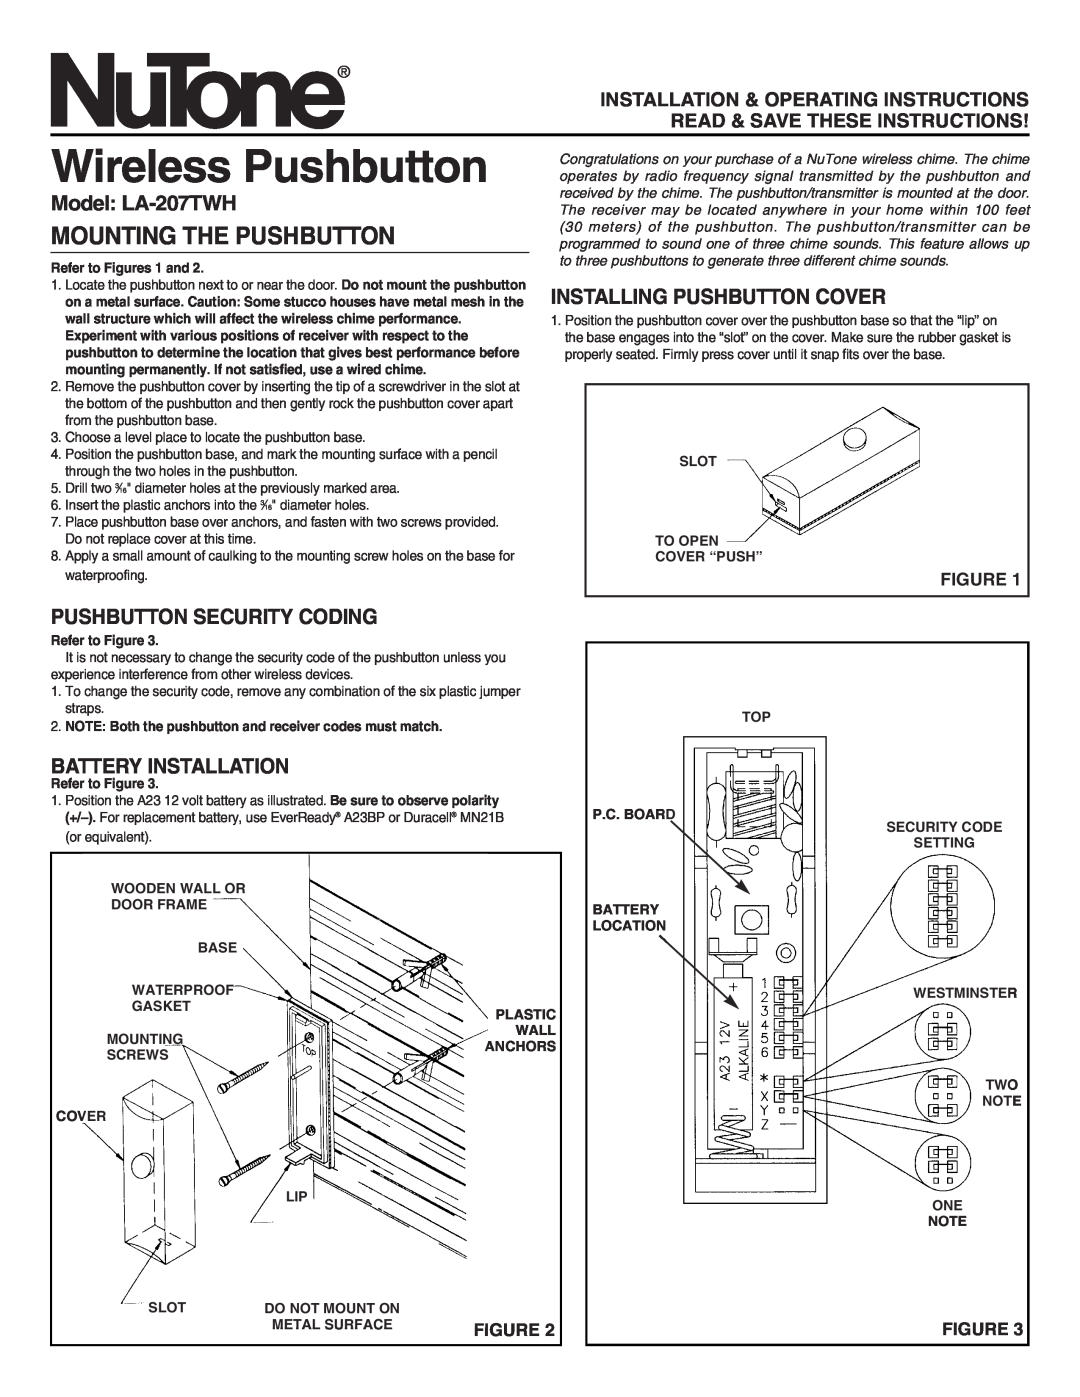 NuTone manual Wireless Pushbutton, Mounting The Pushbutton, Model LA-207TWH, Installing Pushbutton Cover 